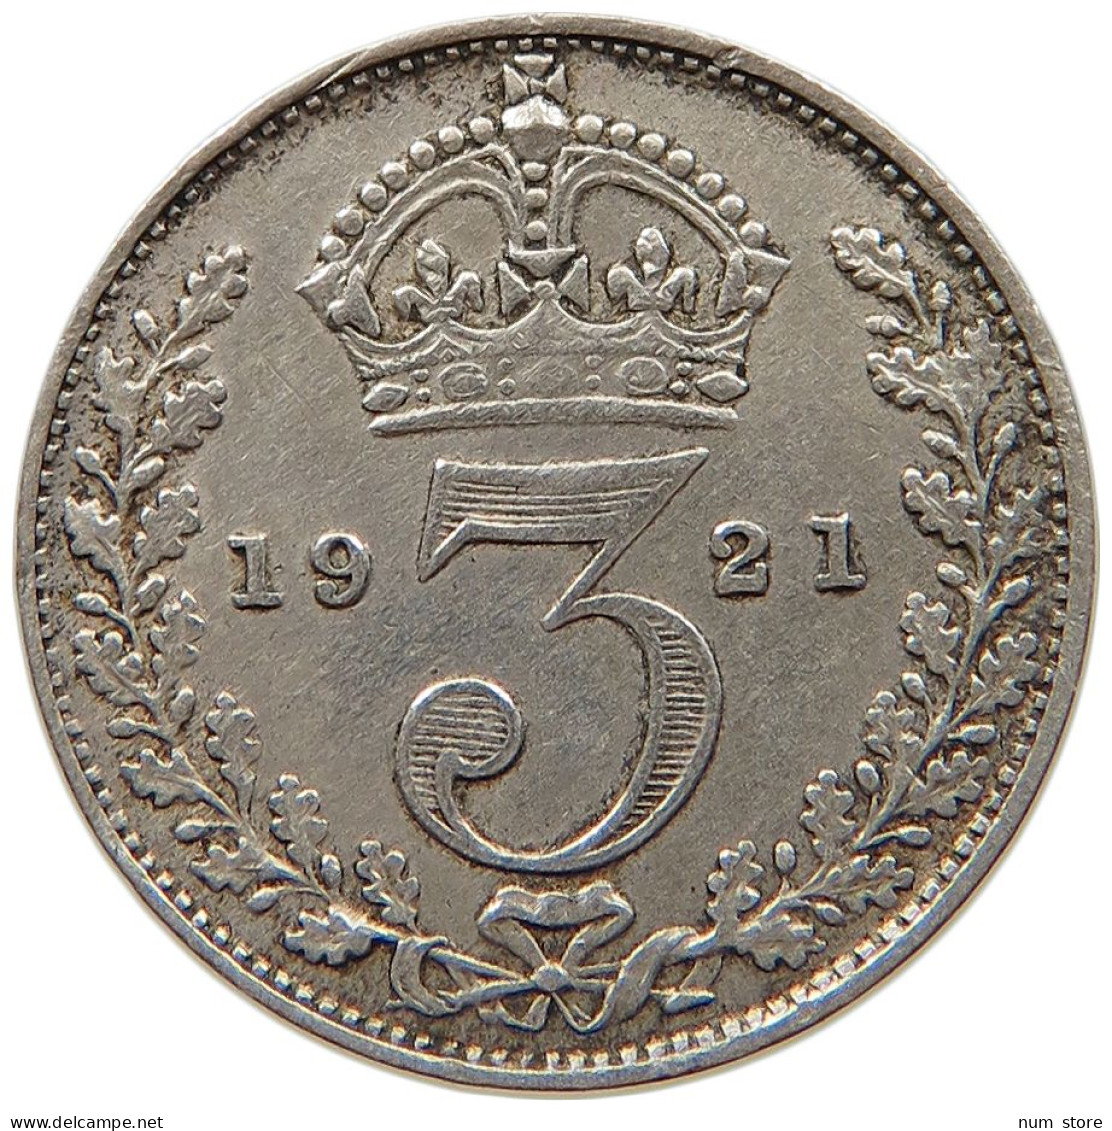 GREAT BRITAIN THREEPENCE 1921 #s017 0195 - F. 3 Pence